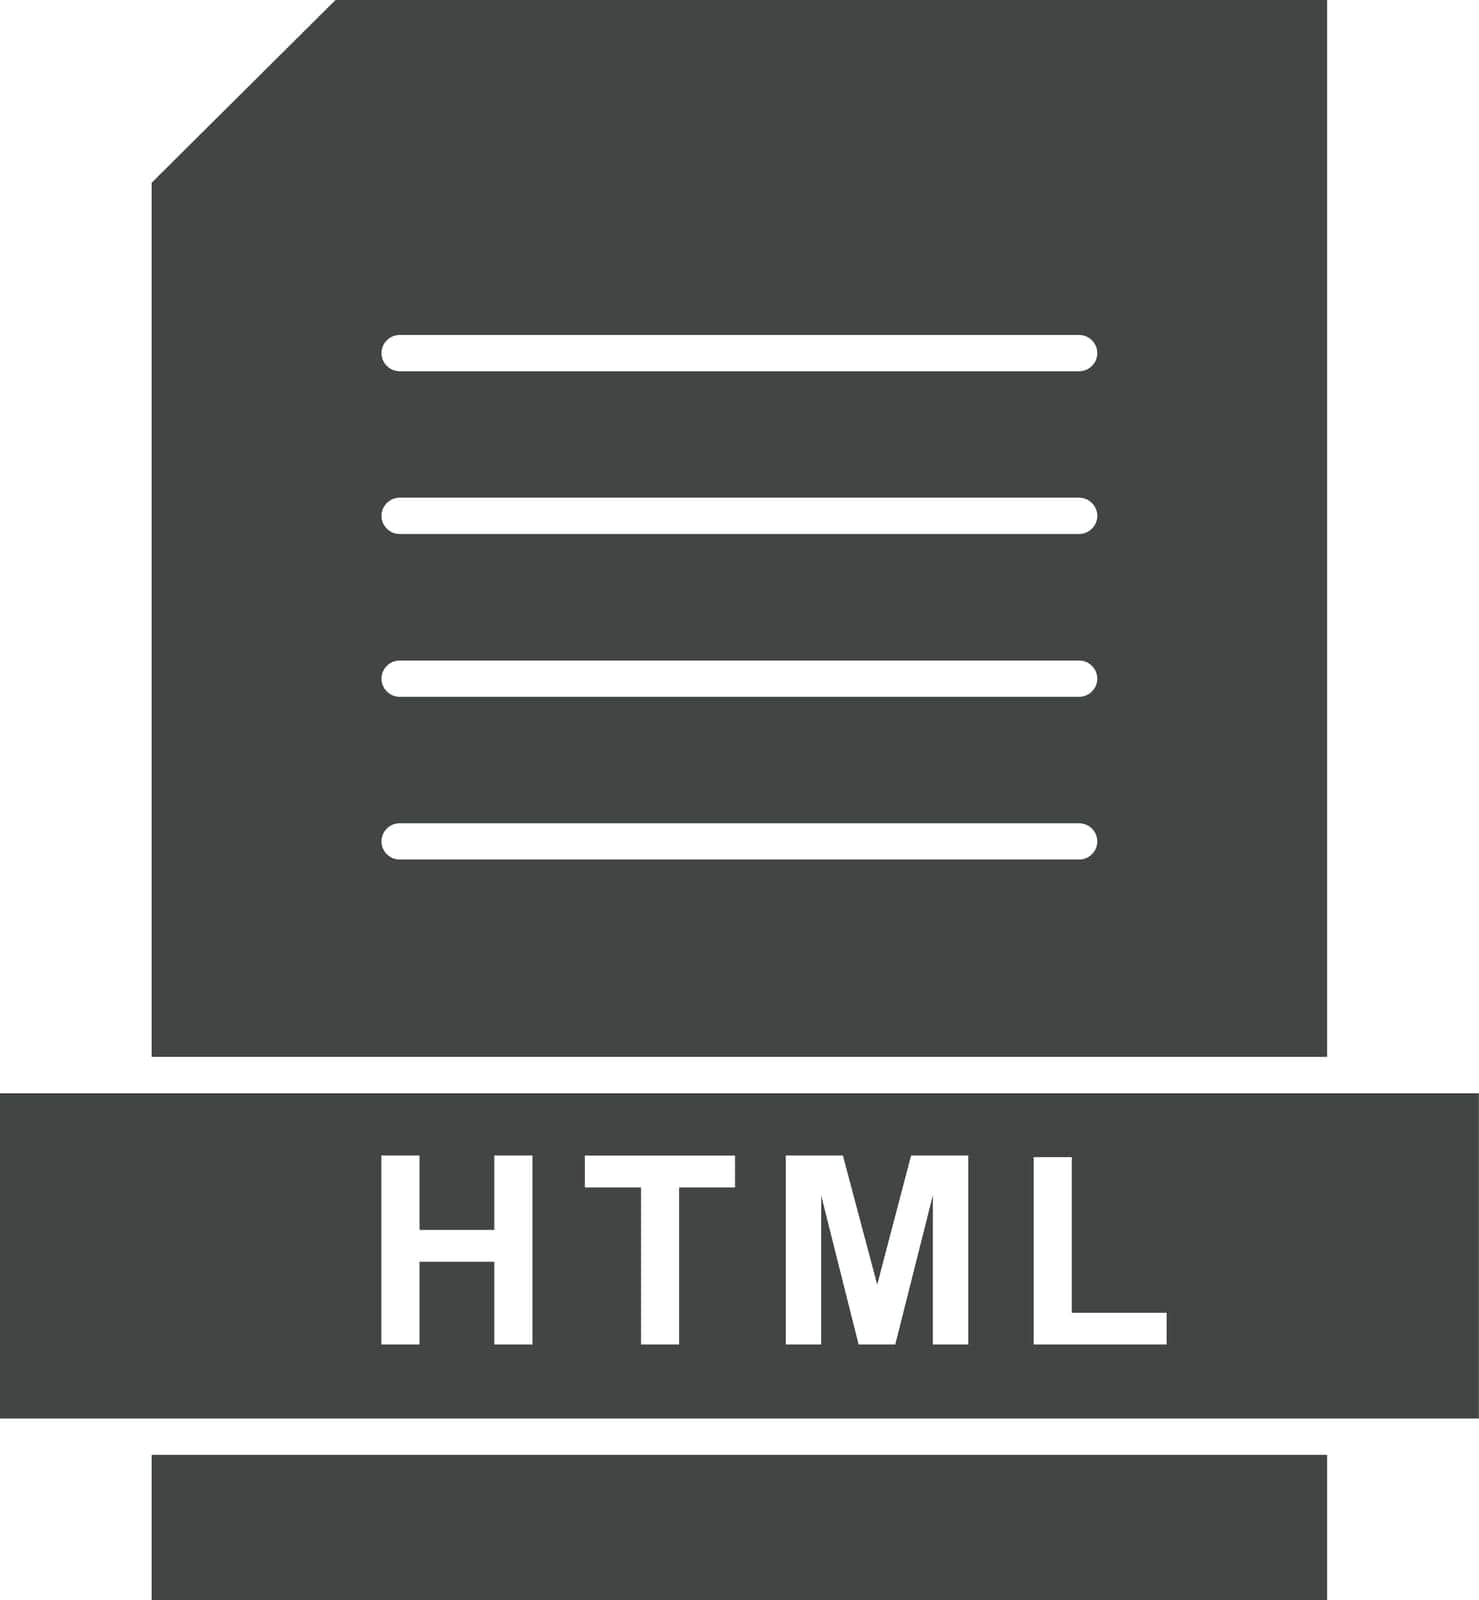 HTML icon vector image. Suitable for mobile application web application and print media.